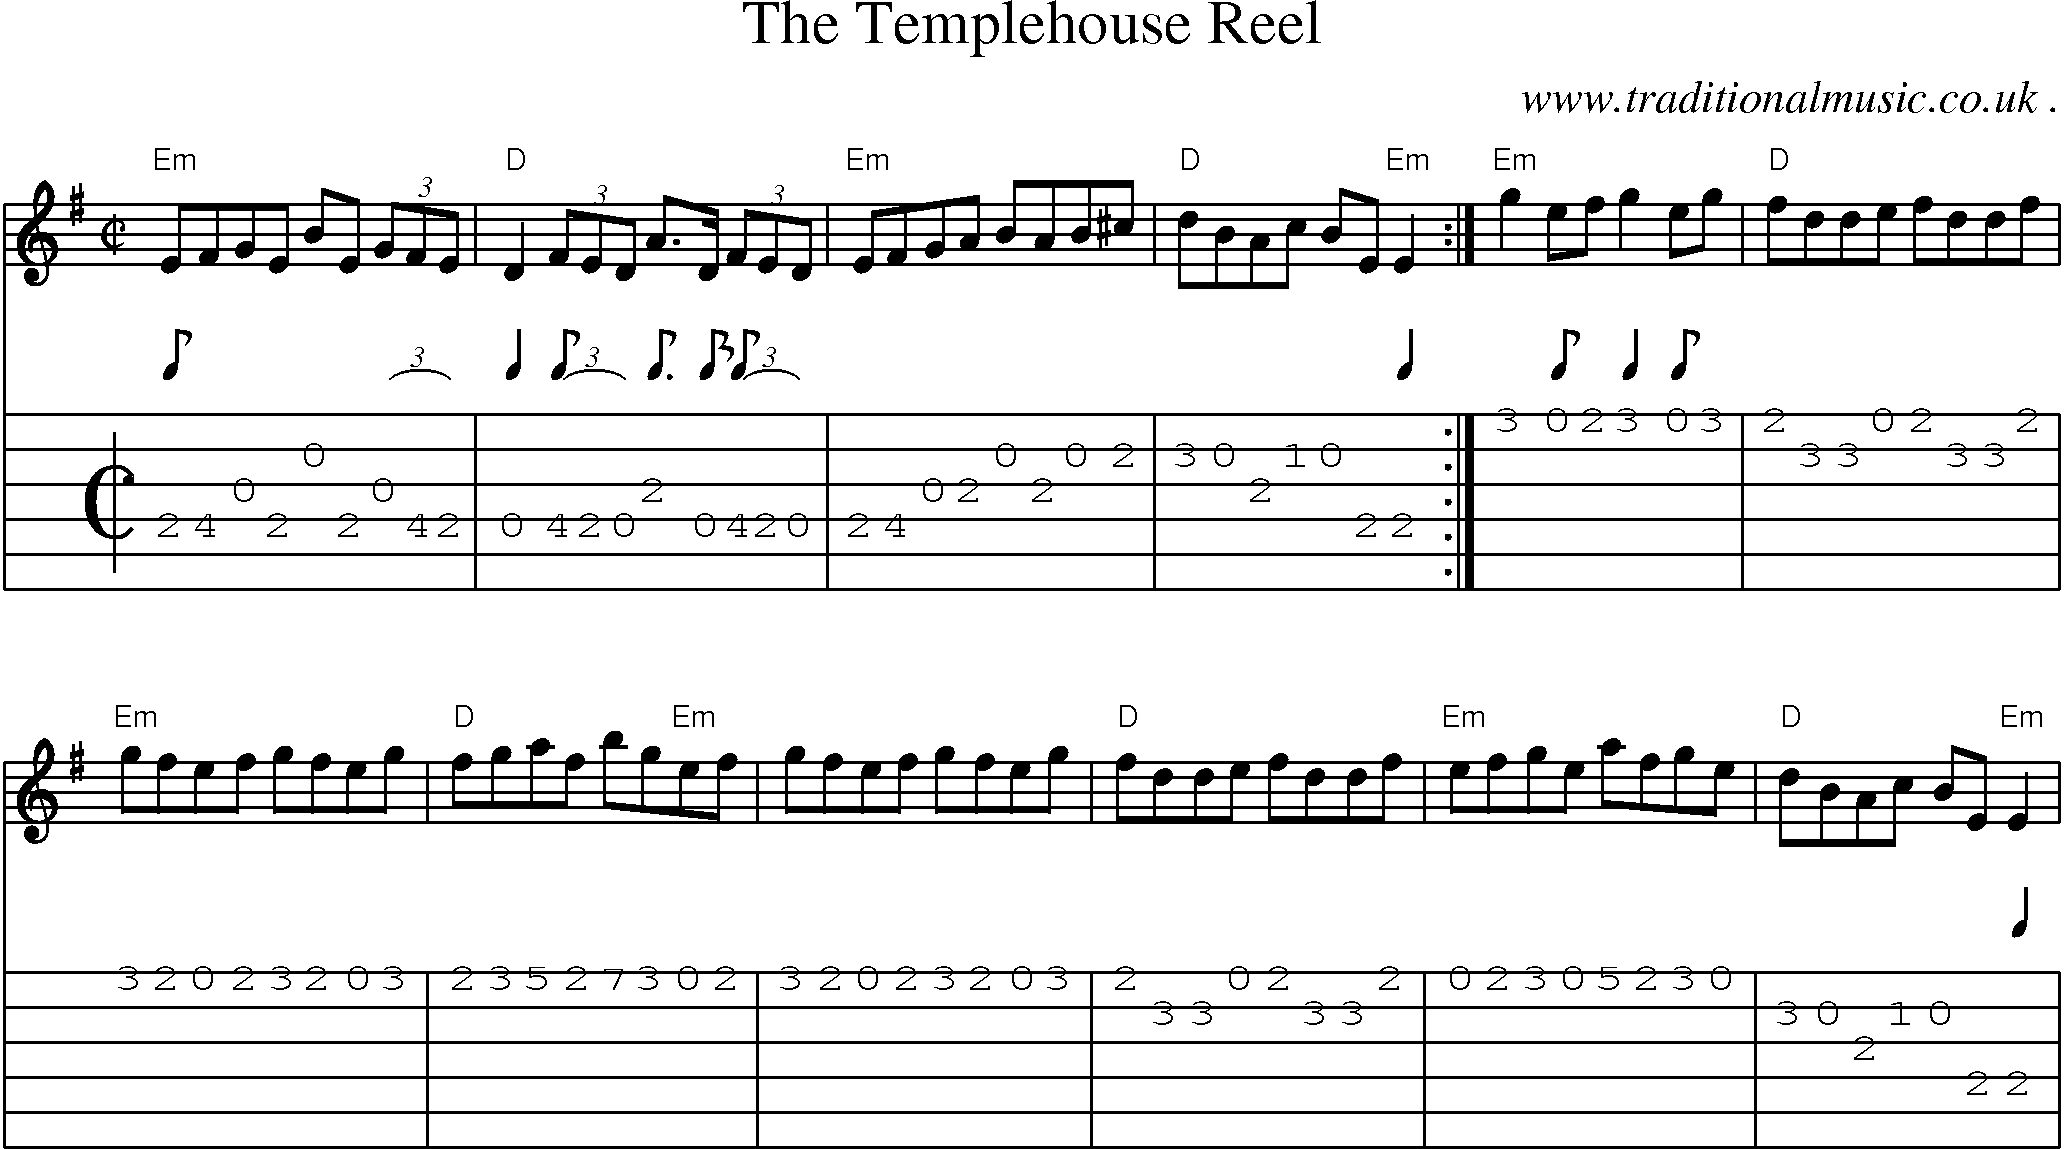 Music Score and Guitar Tabs for The Templehouse Reel